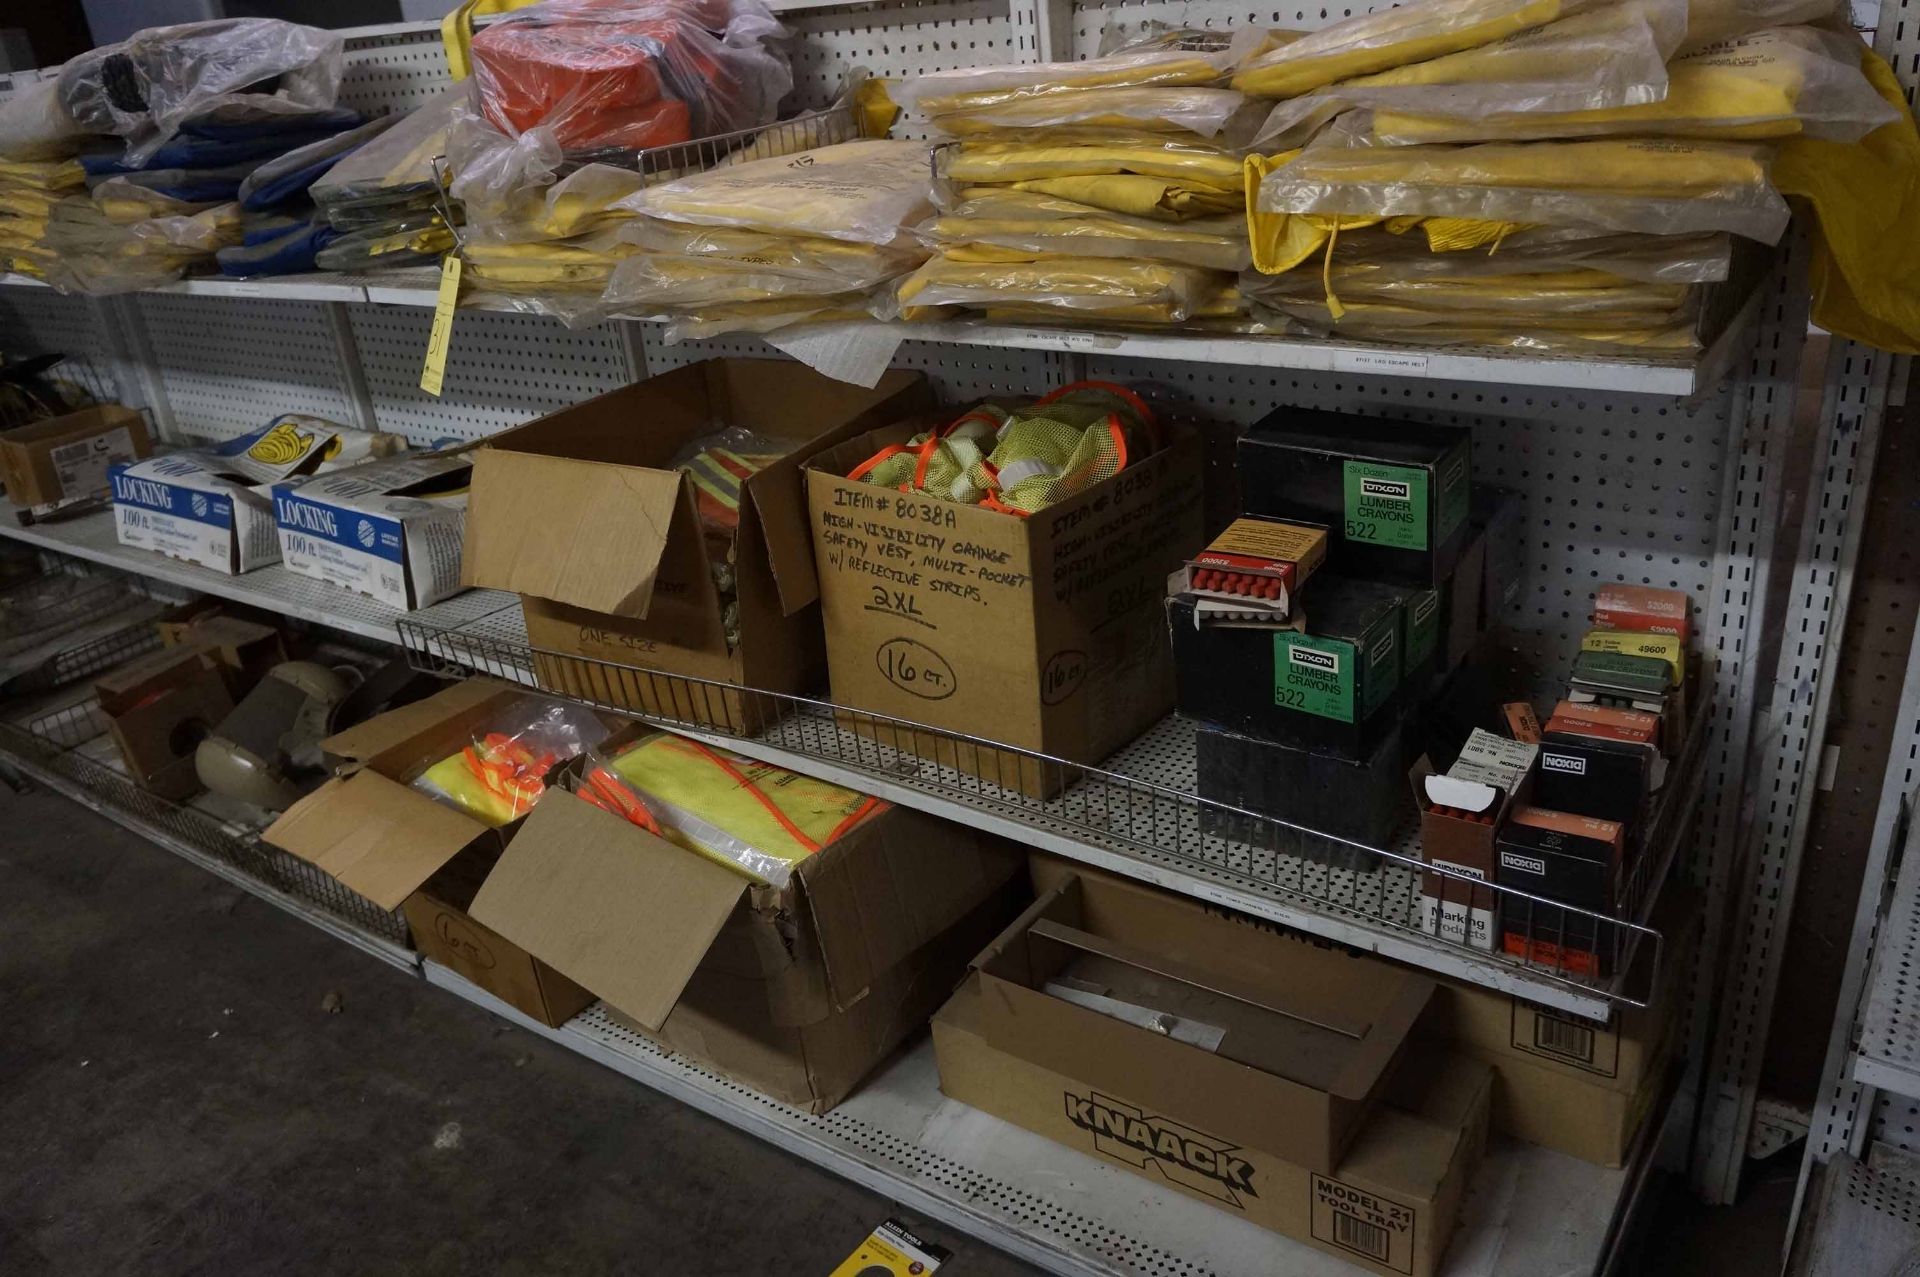 LOT OF SHELVES, w/100' extension cords, rain coats, safety vests, & more - Image 2 of 2